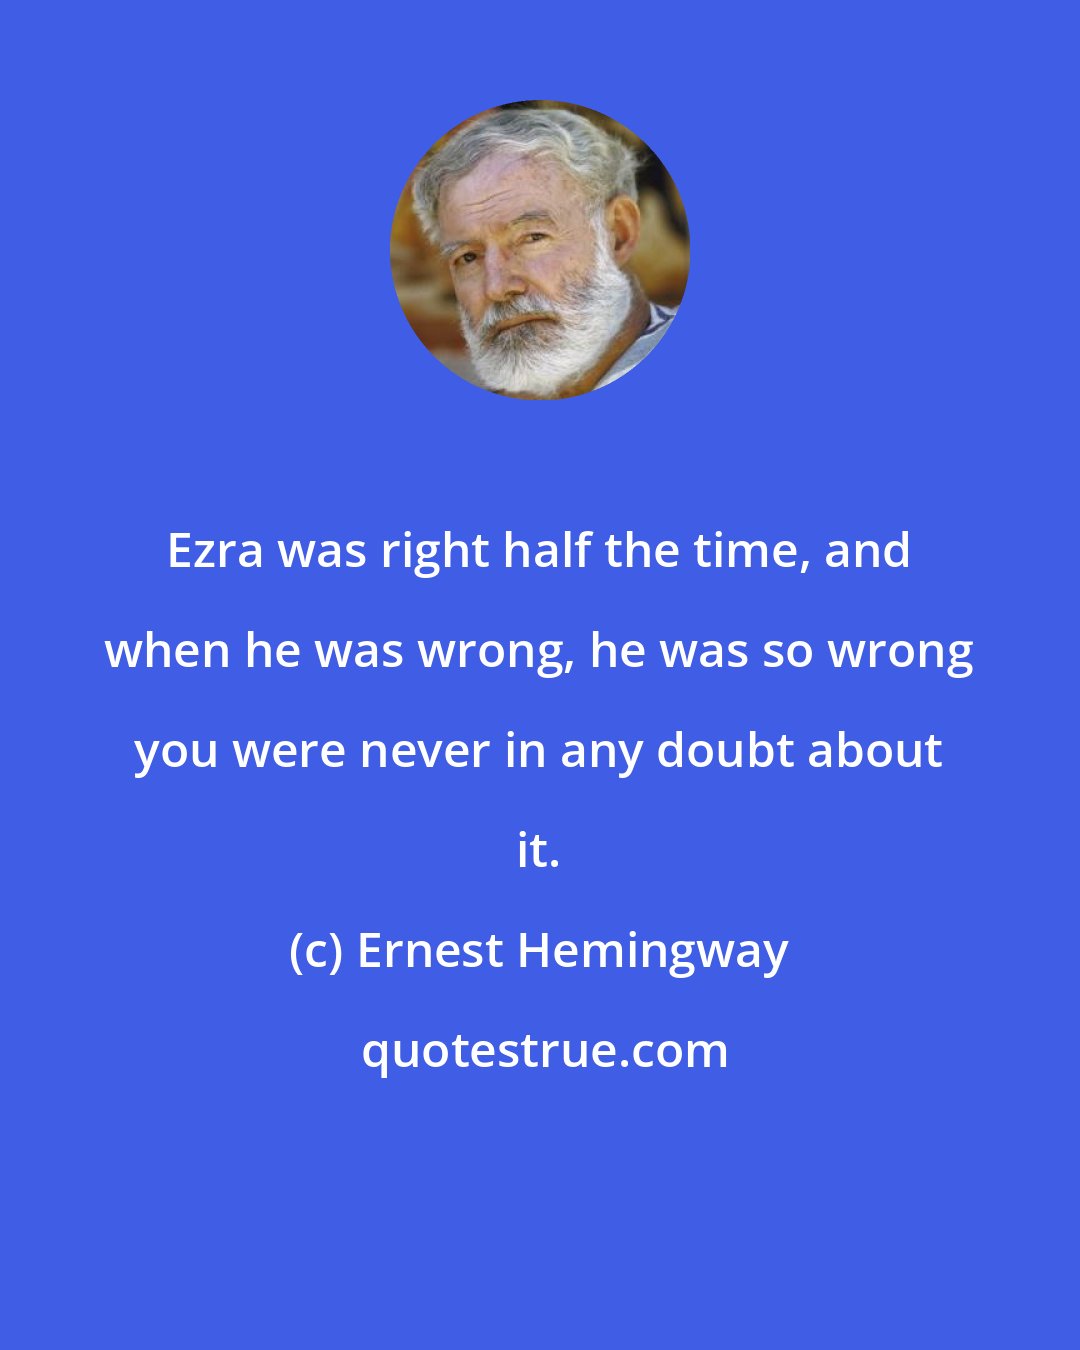 Ernest Hemingway: Ezra was right half the time, and when he was wrong, he was so wrong you were never in any doubt about it.